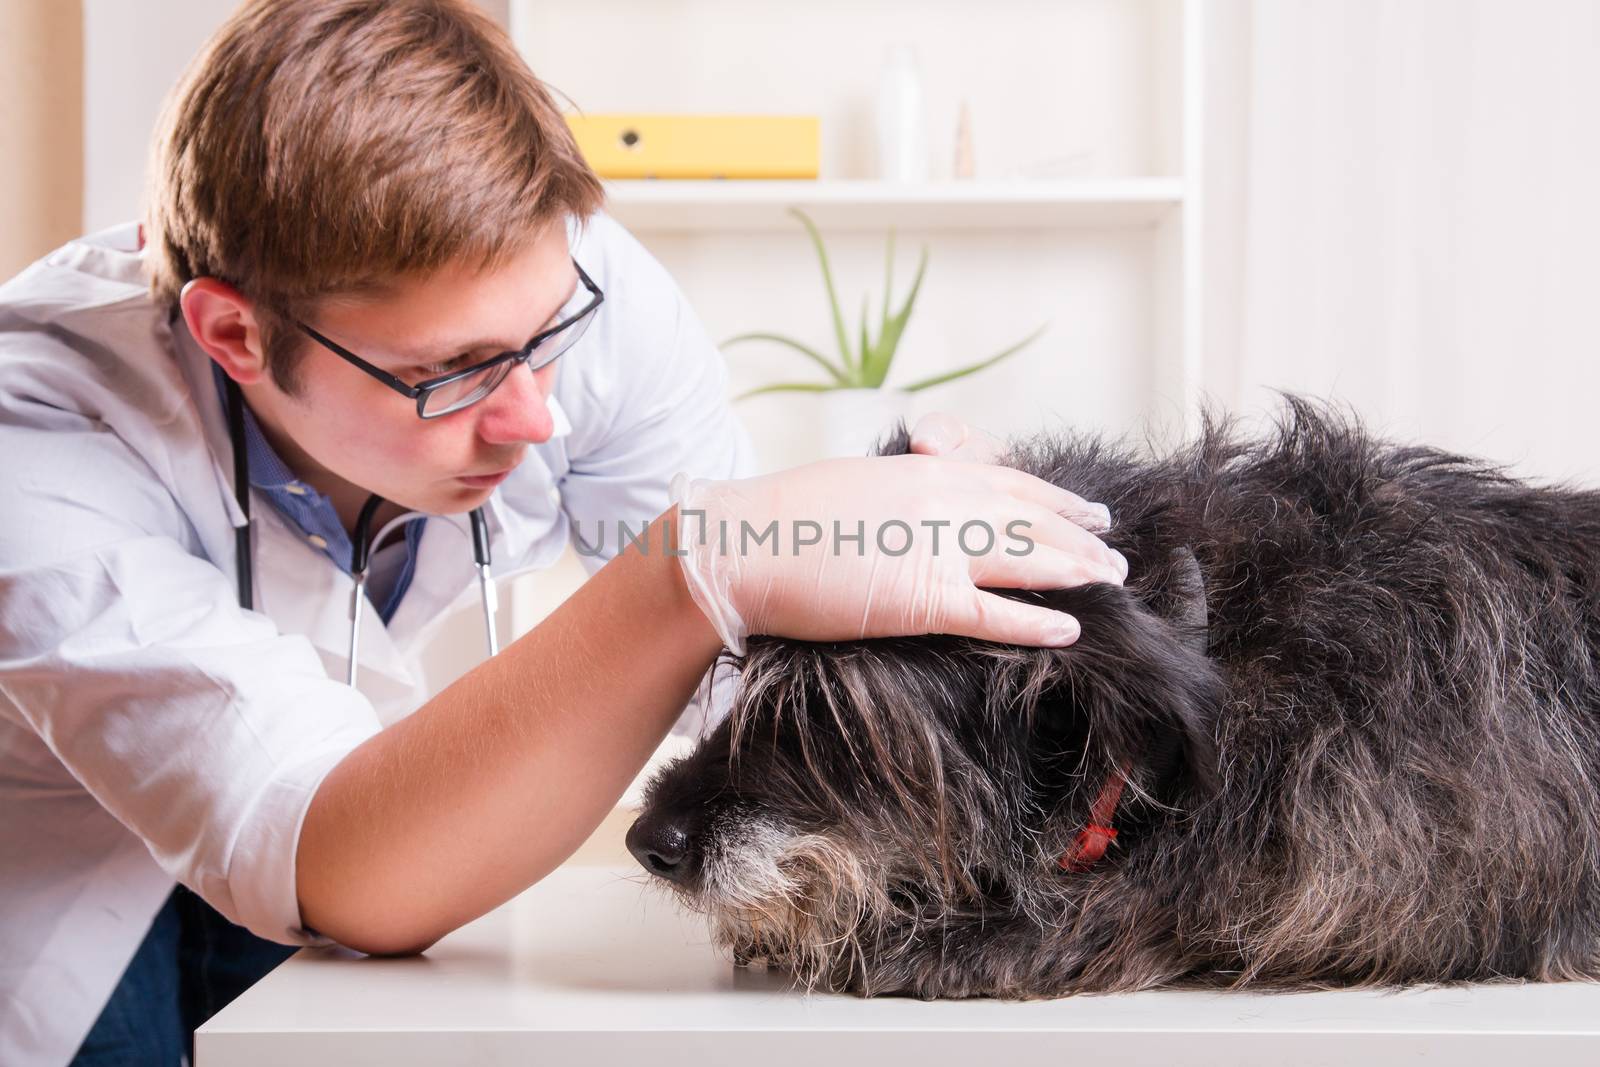 Vet examines the dog's ears in his office